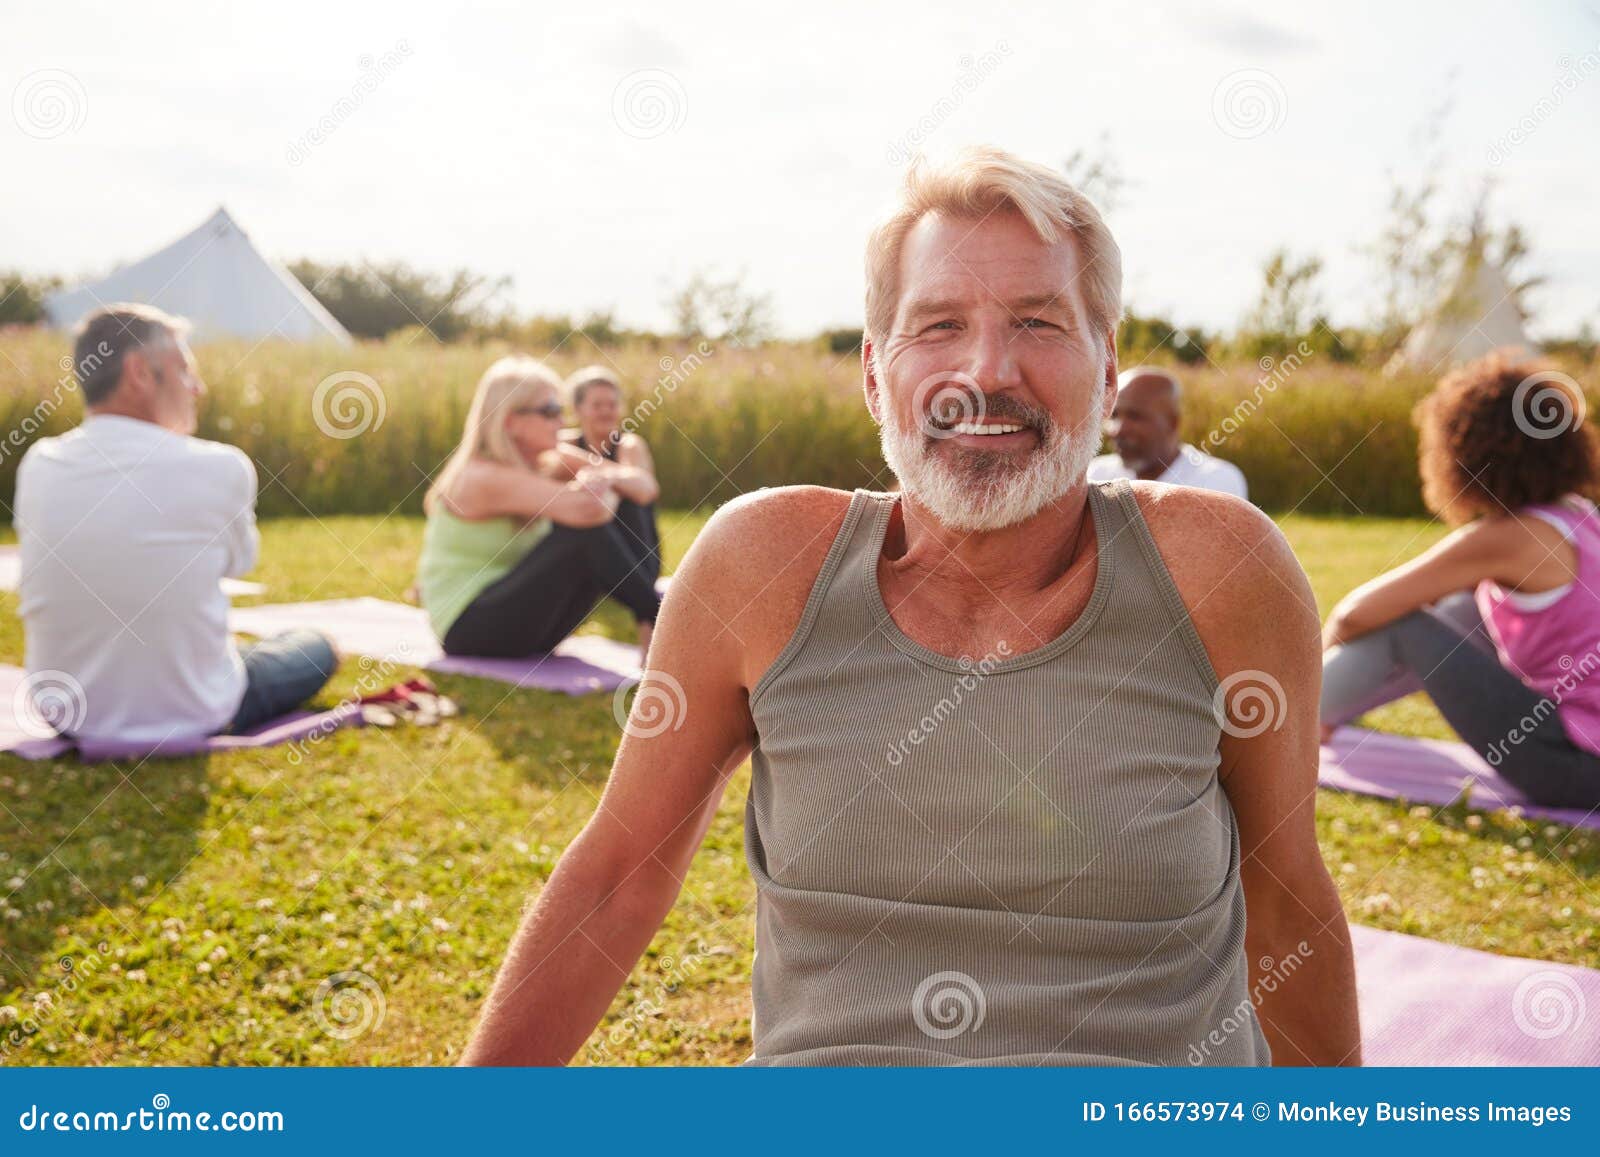 portrait of mature man on outdoor yoga retreat with friends and campsite in background